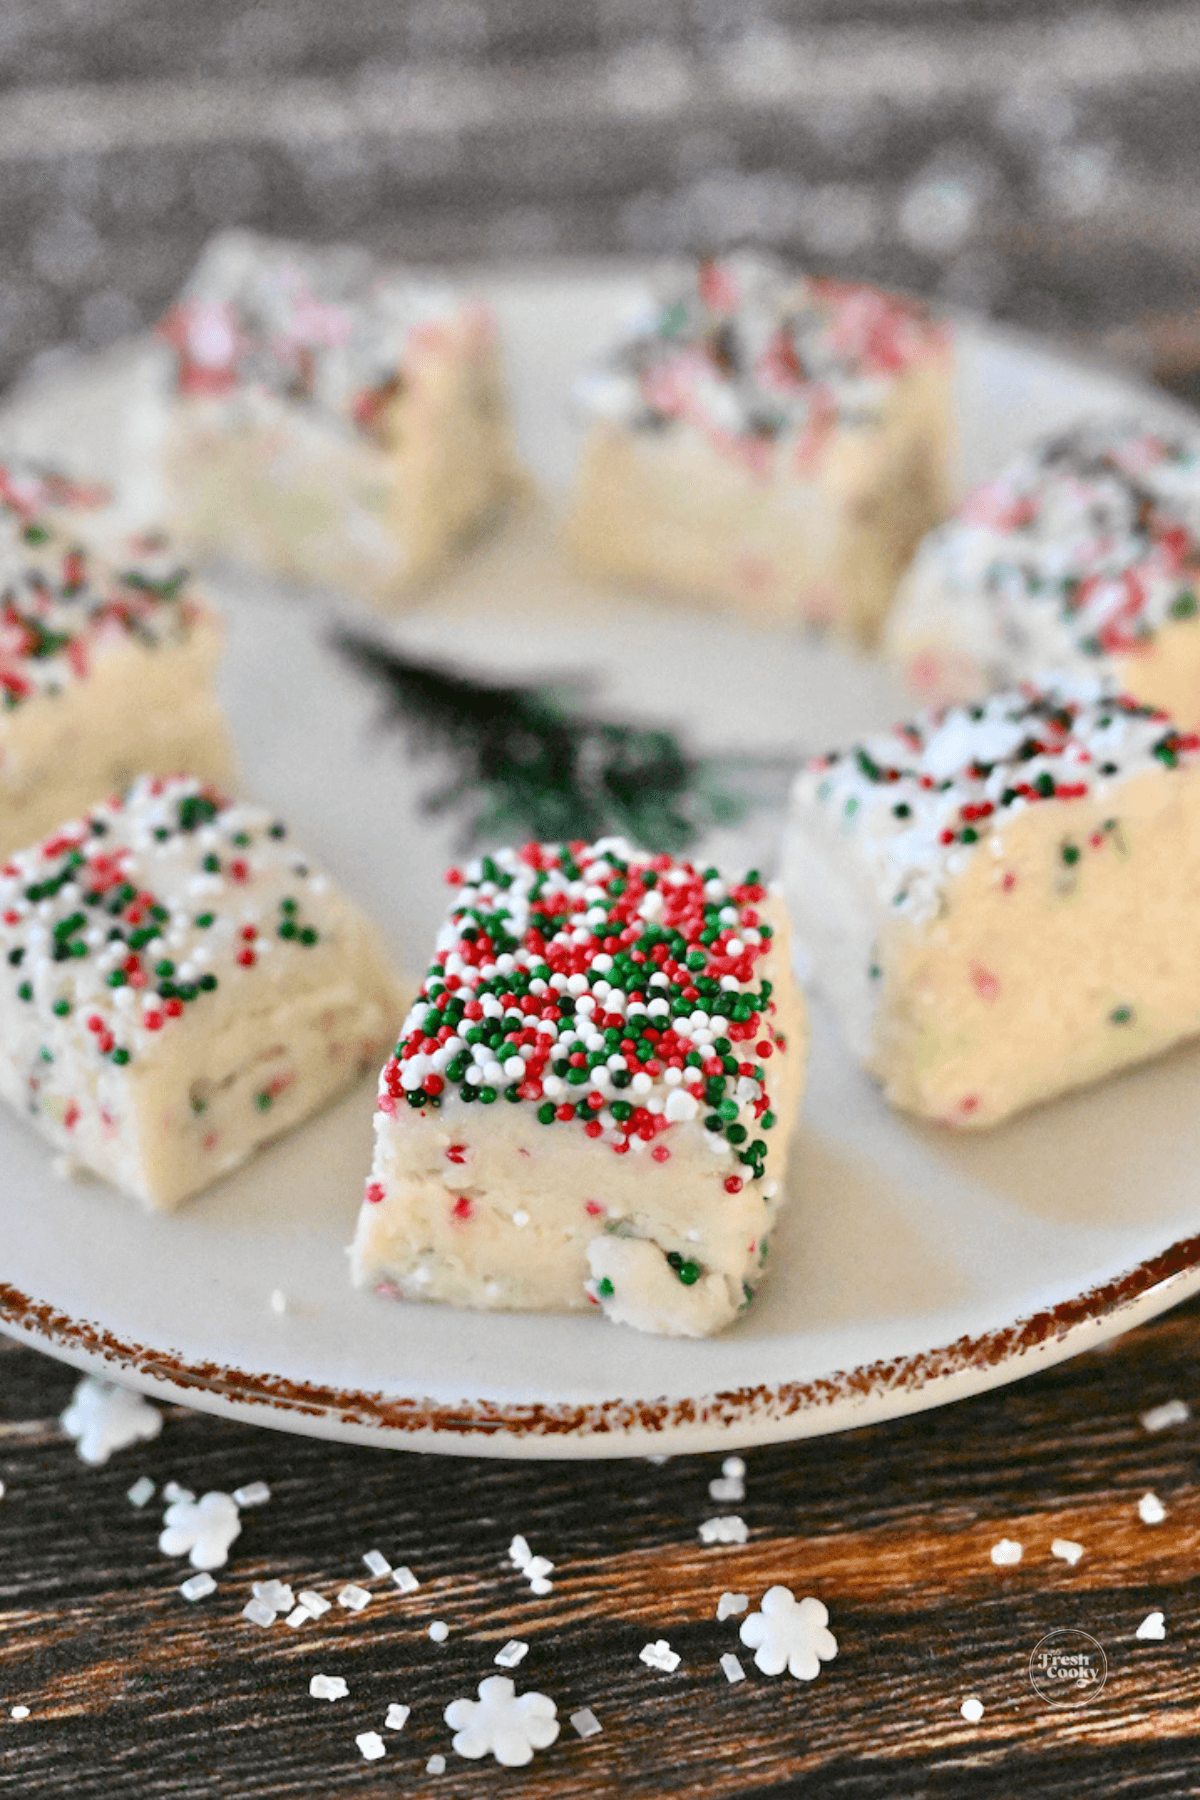 Plate filled with bites of Christmas Cookie Fudge.